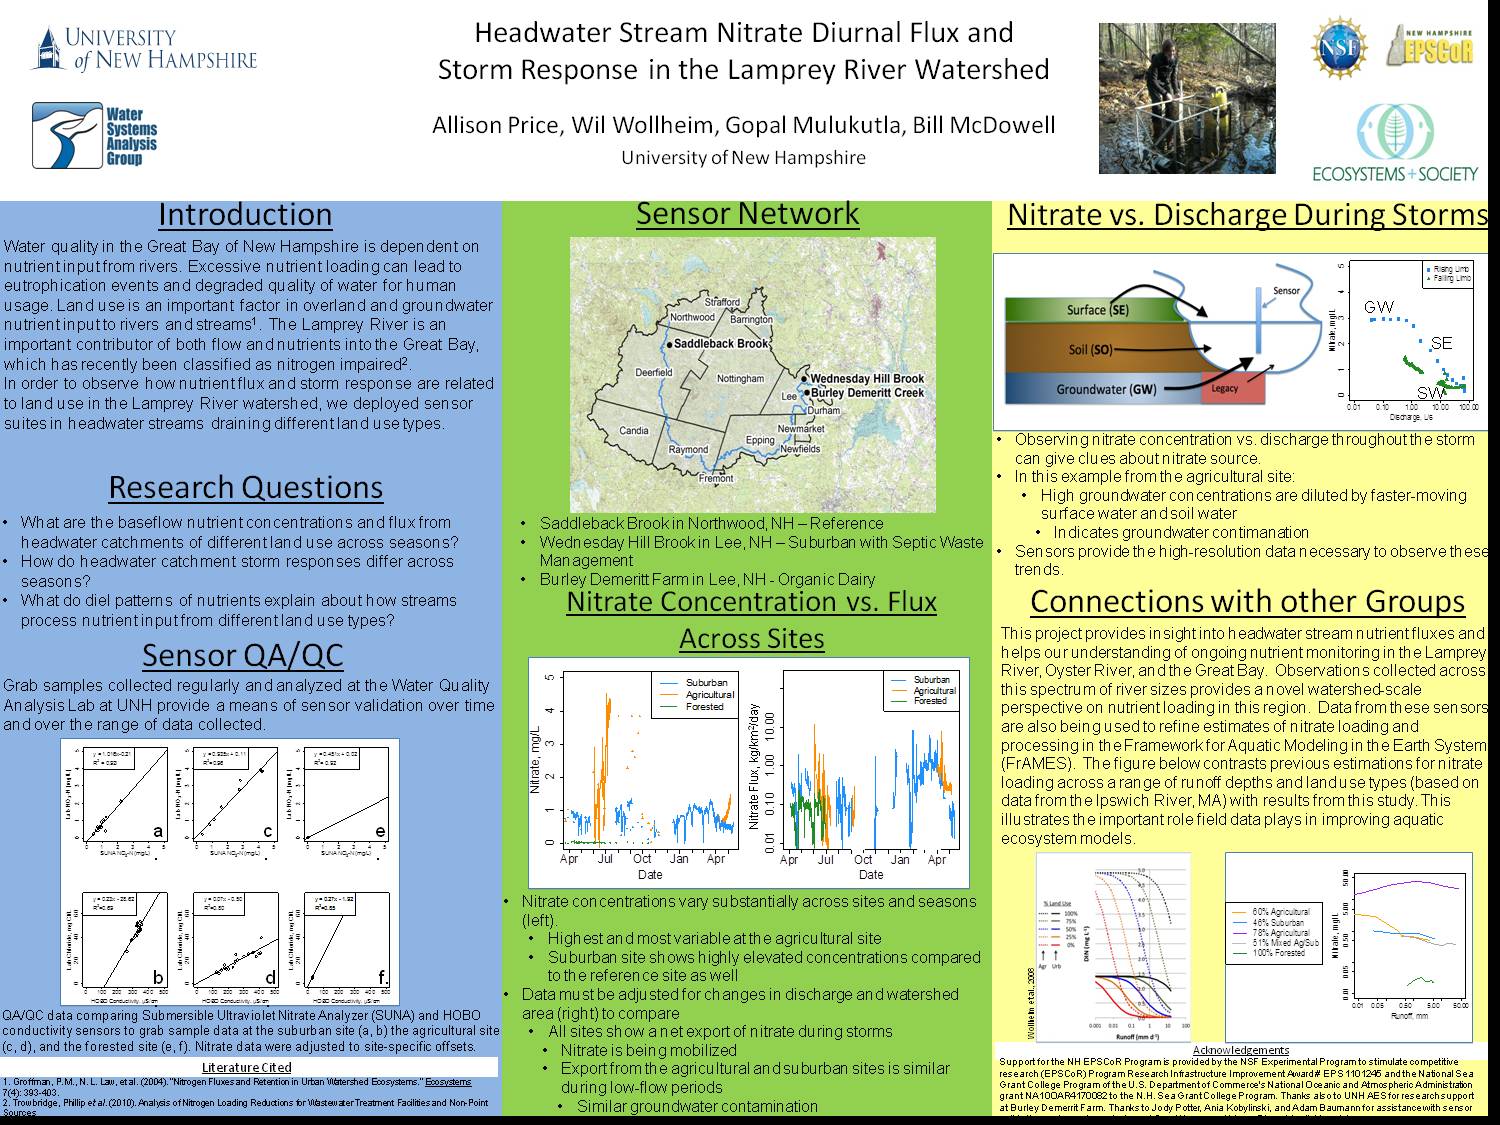 Headwater Stream Nitrate Diurnal Flux And Storm Response In The Lamprey River Watershed by aur7